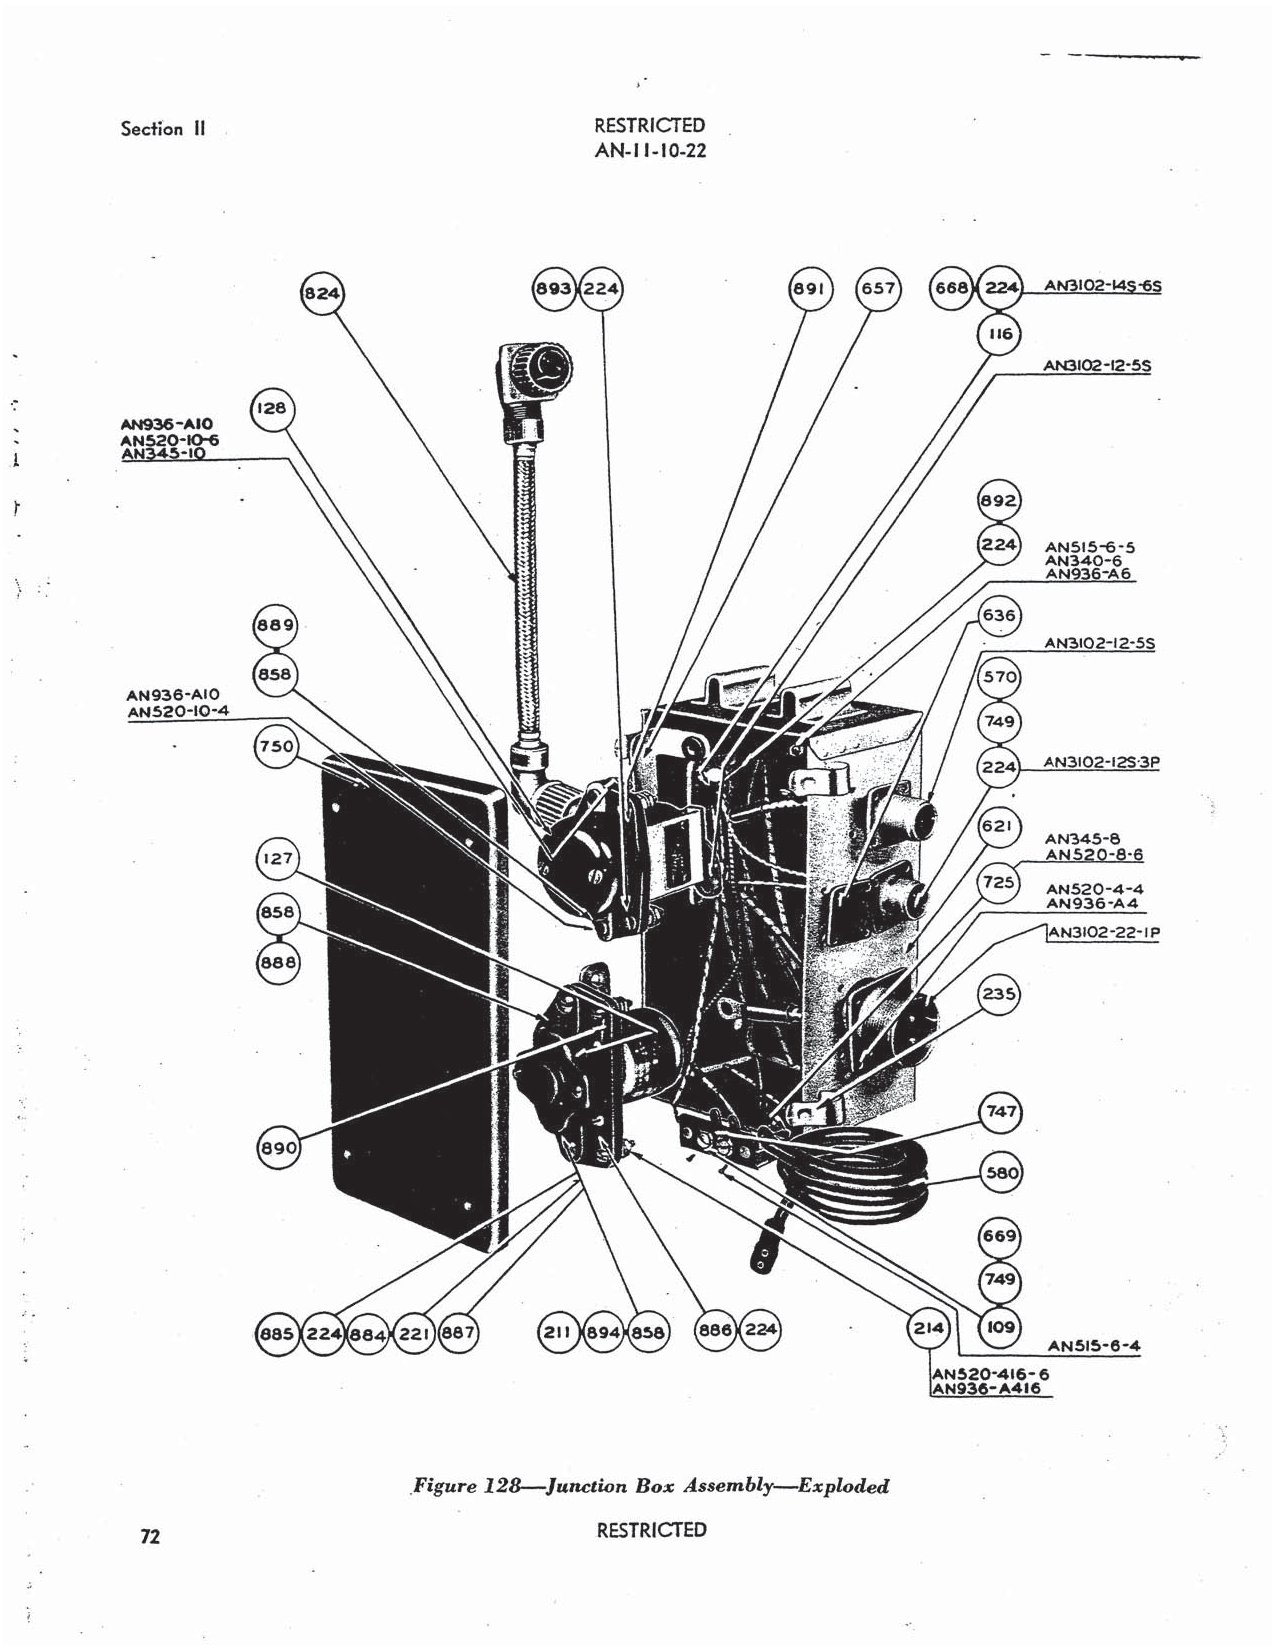 Sample page 72 from AirCorps Library document: Twin Gun Mount Assembly - Type M-7 - Bell